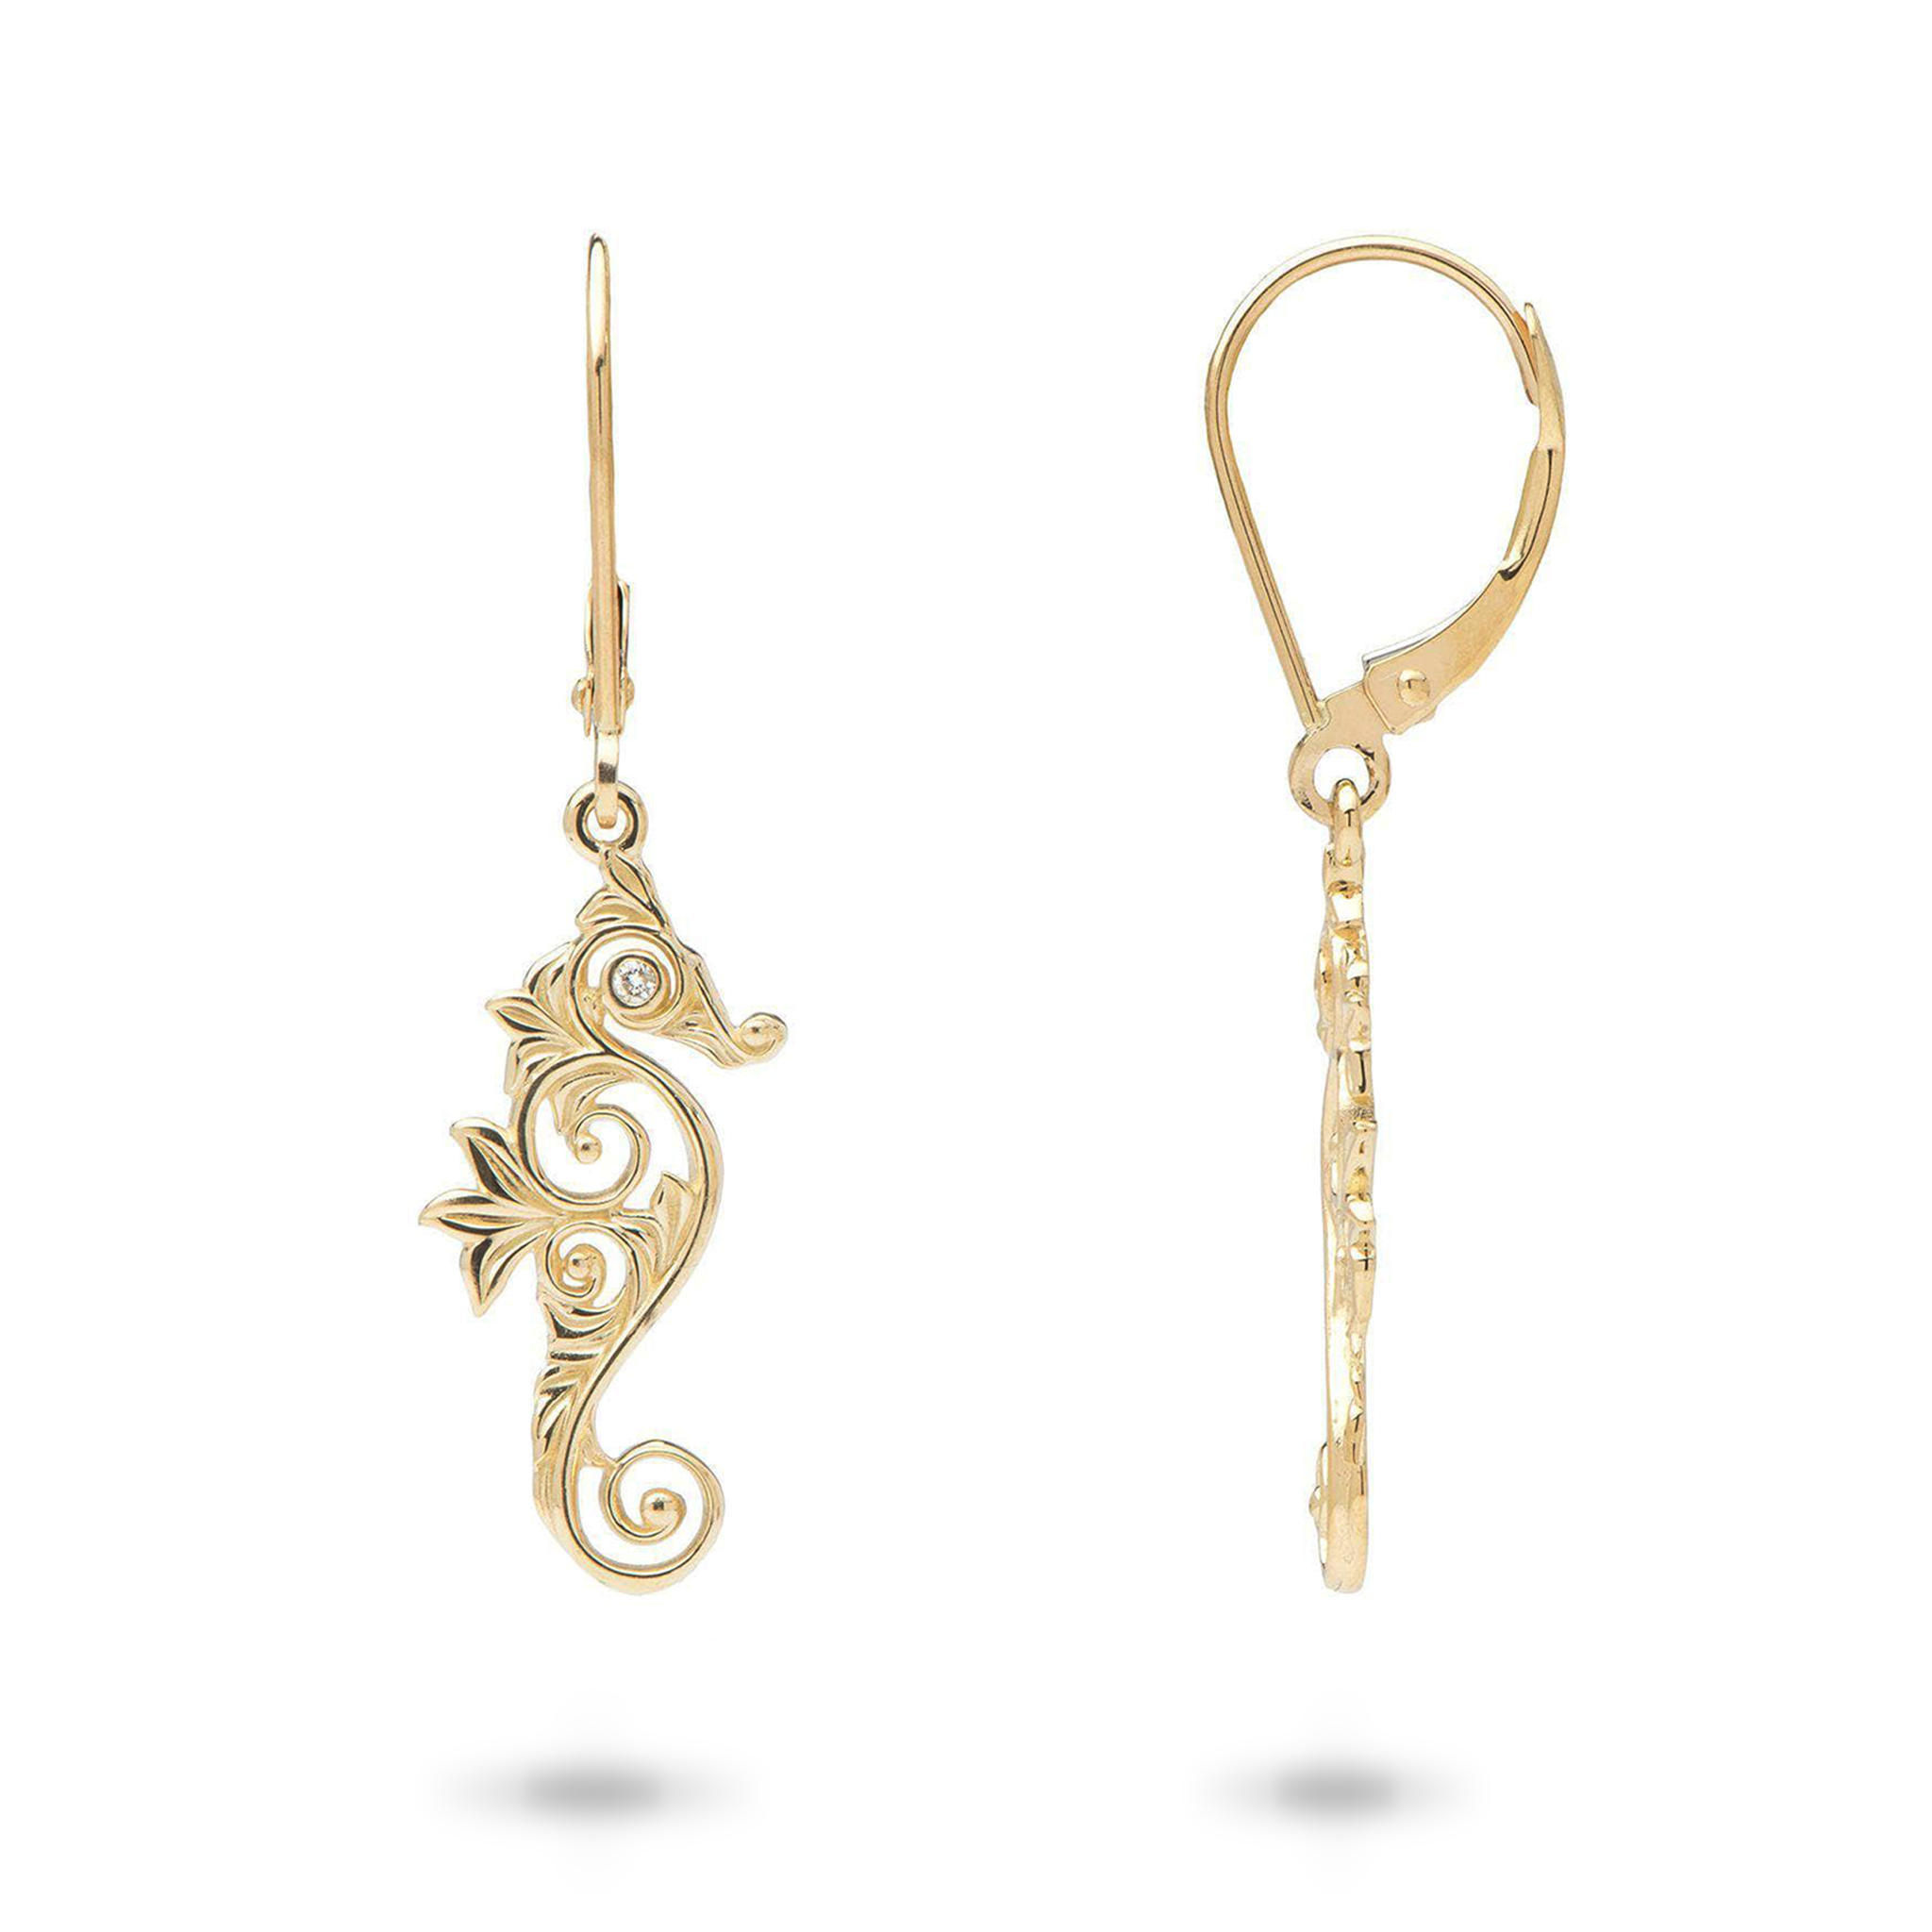 Living Heirloom Seahorse Earrings in Gold with Diamonds - 22mm